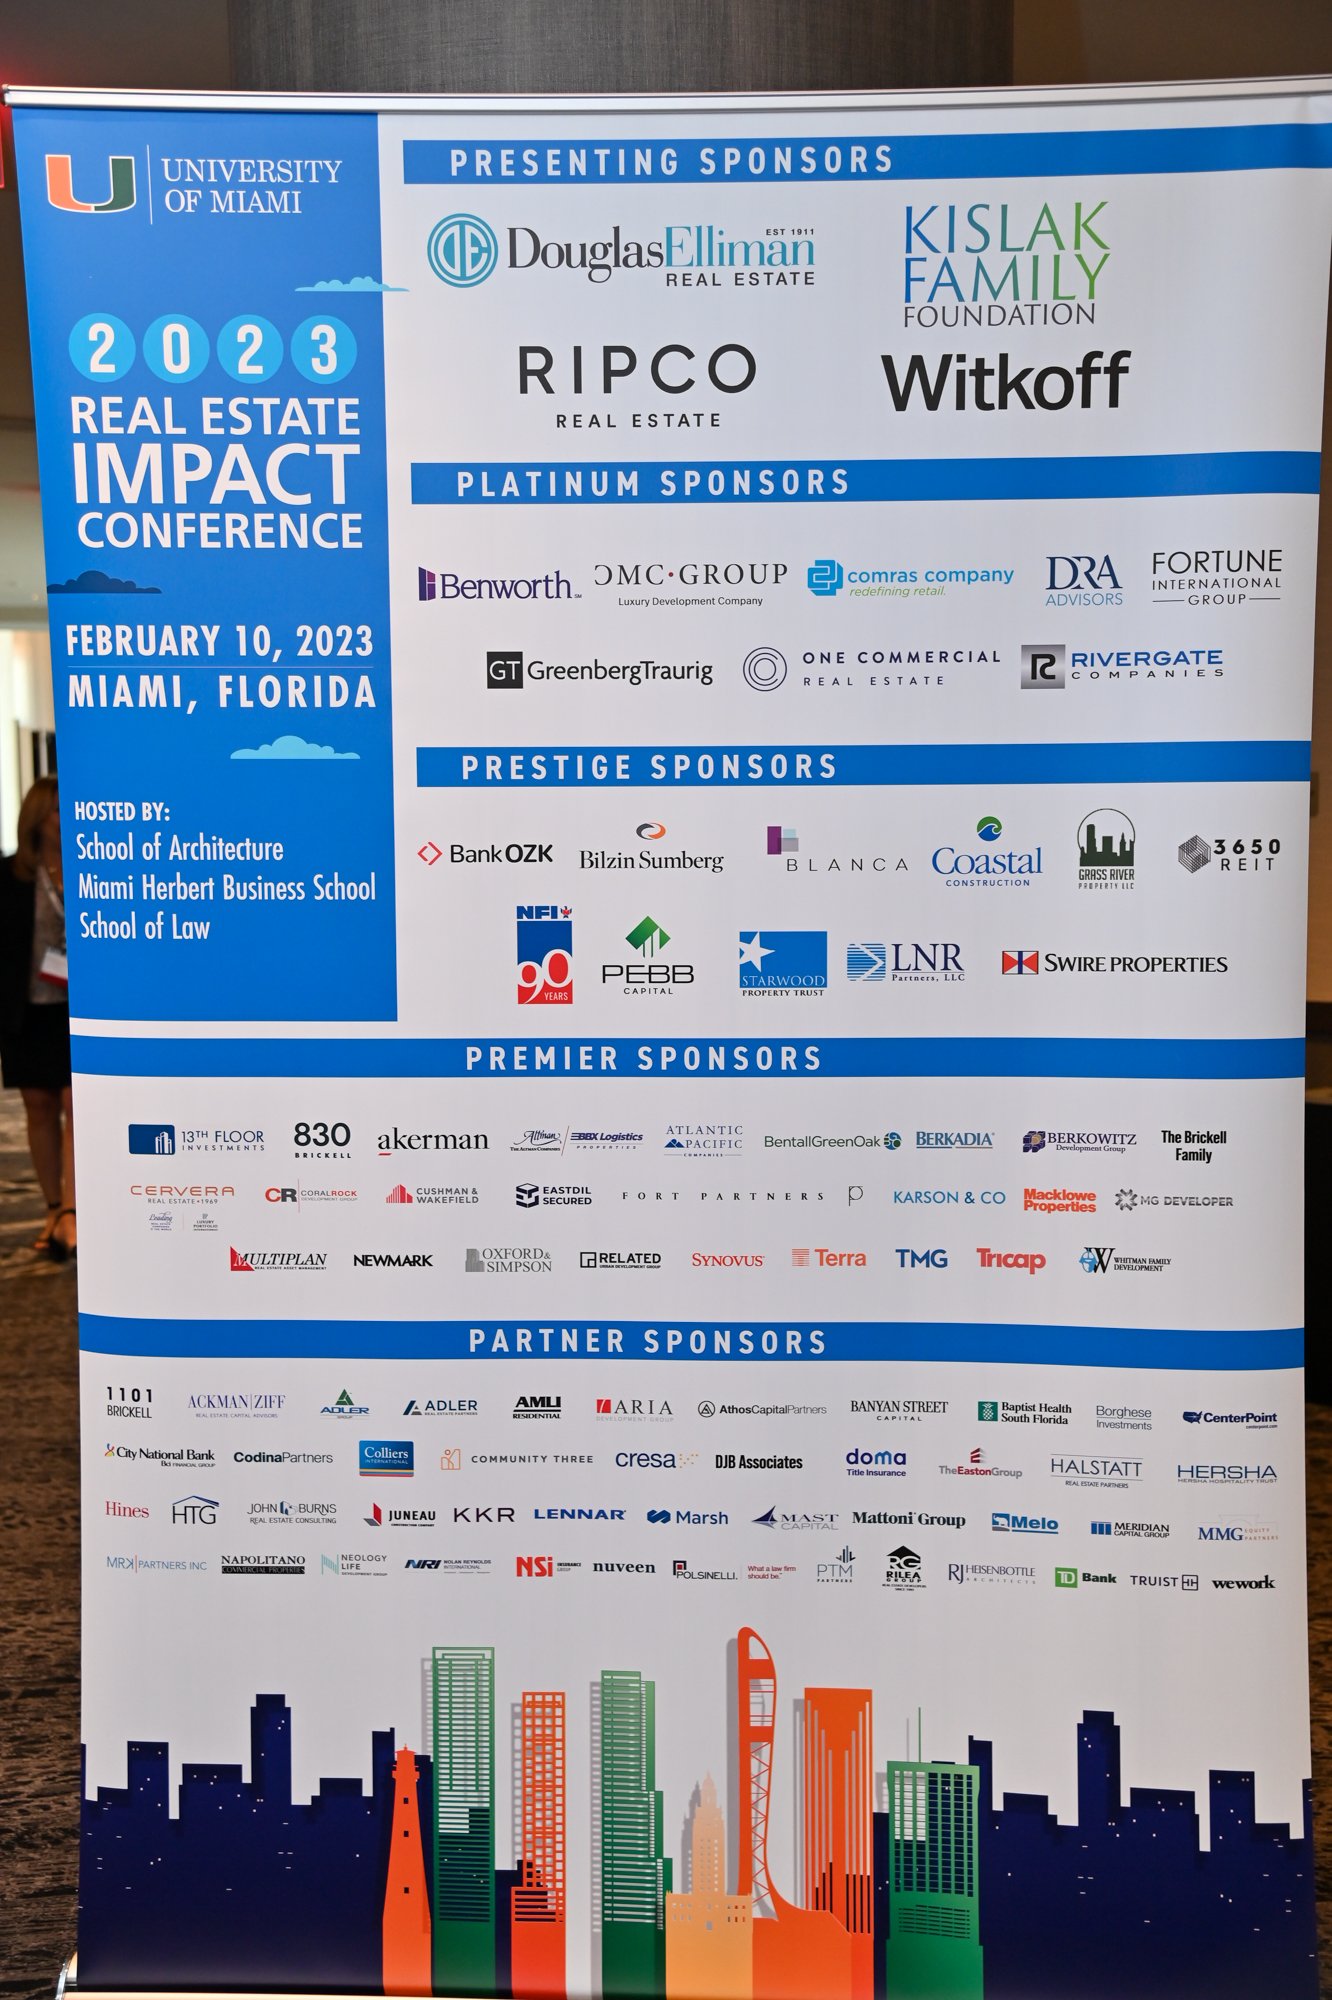 University of Miami Real Estate Impact Conference 2023 The Largest Edition Yet As Real Estate Leaders Discuss The State of Miami Real Estate 1.jpg